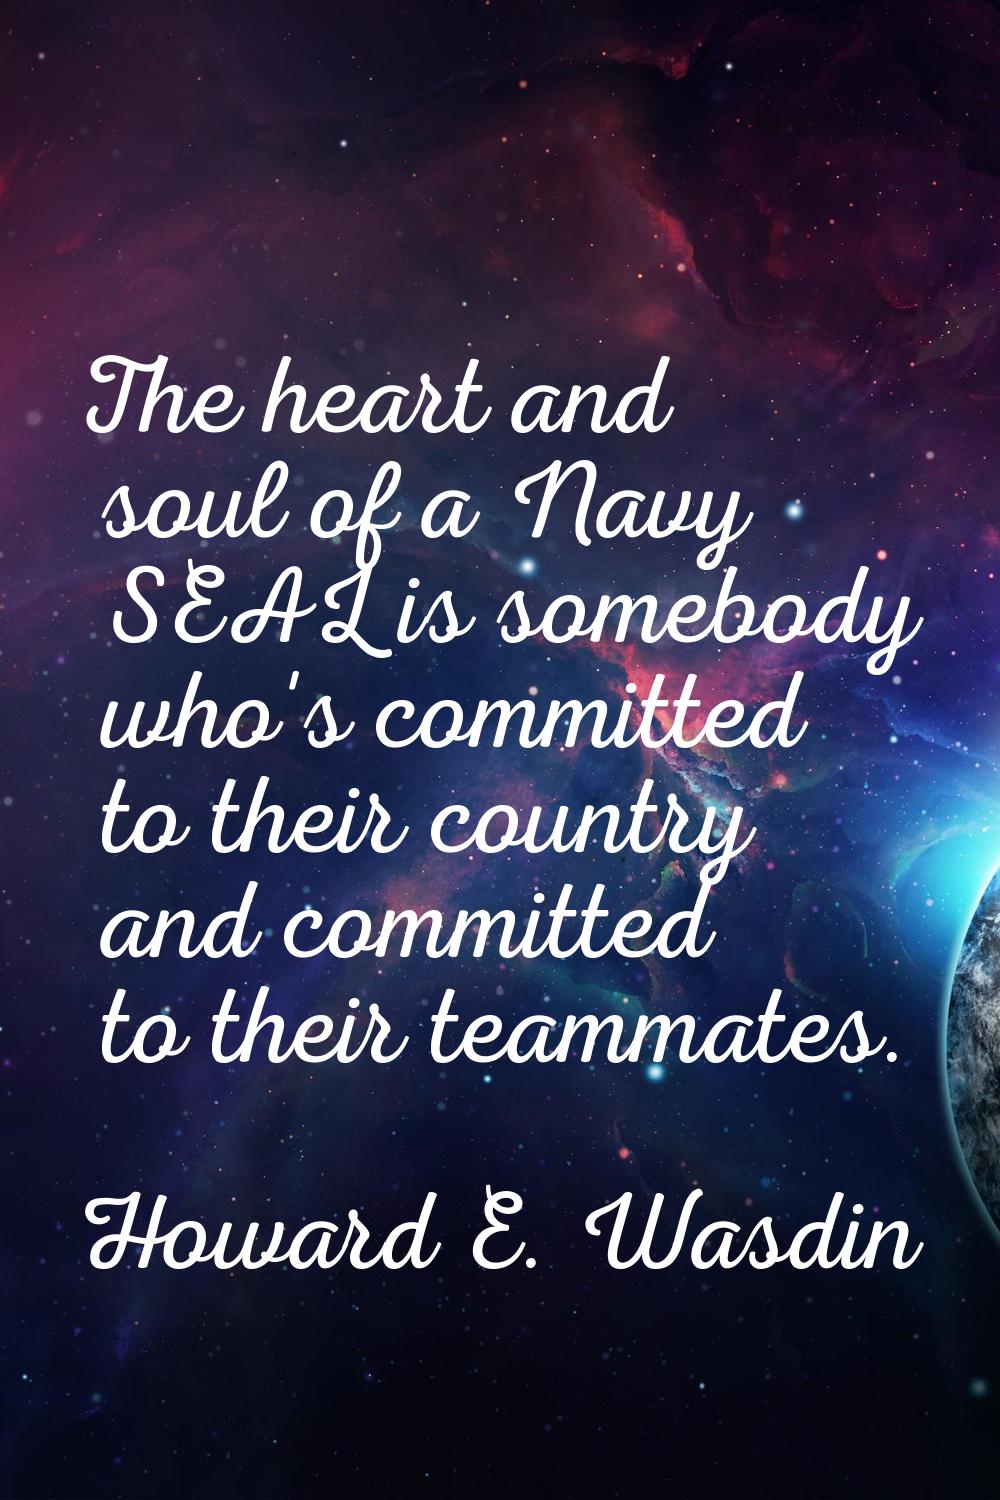 The heart and soul of a Navy SEAL is somebody who's committed to their country and committed to the